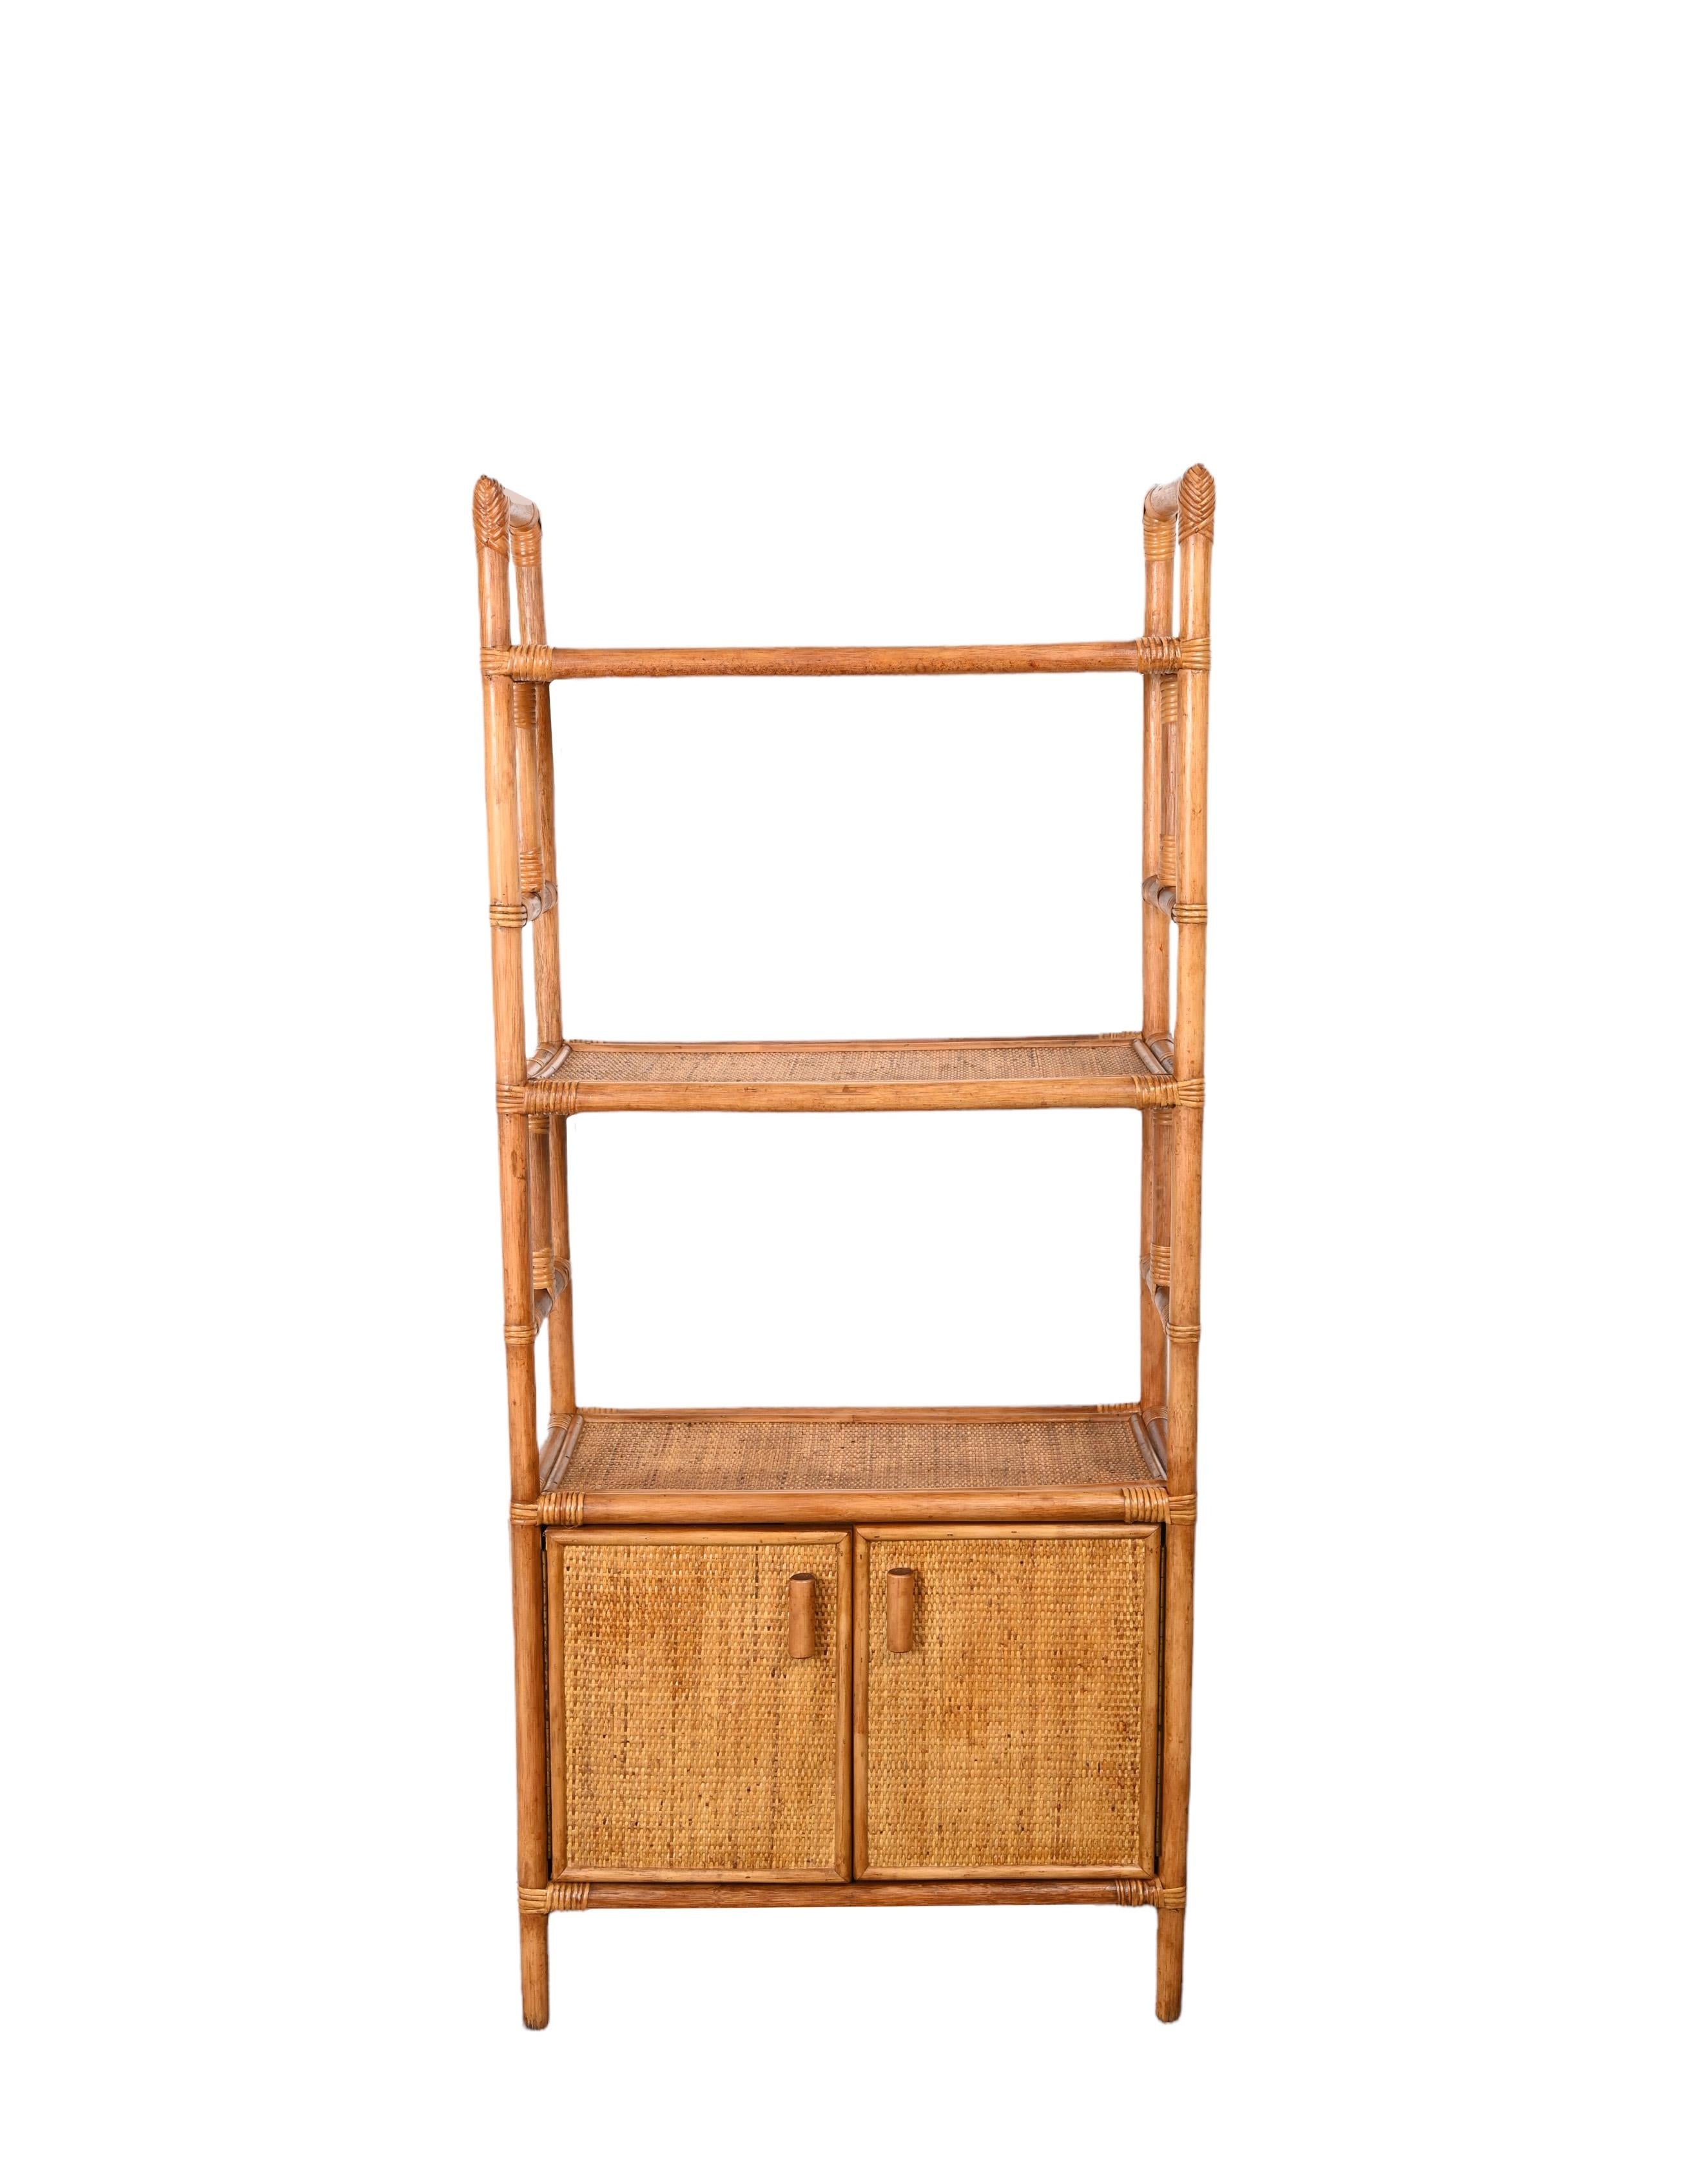 Amazing midcentury modern rattan and bamboo bookcase with doors. This fantastic piece was designed in Italy during the 1970s.

This bookcase is very capacious, as it has three large shelves on the top part and a large section enclosed between two